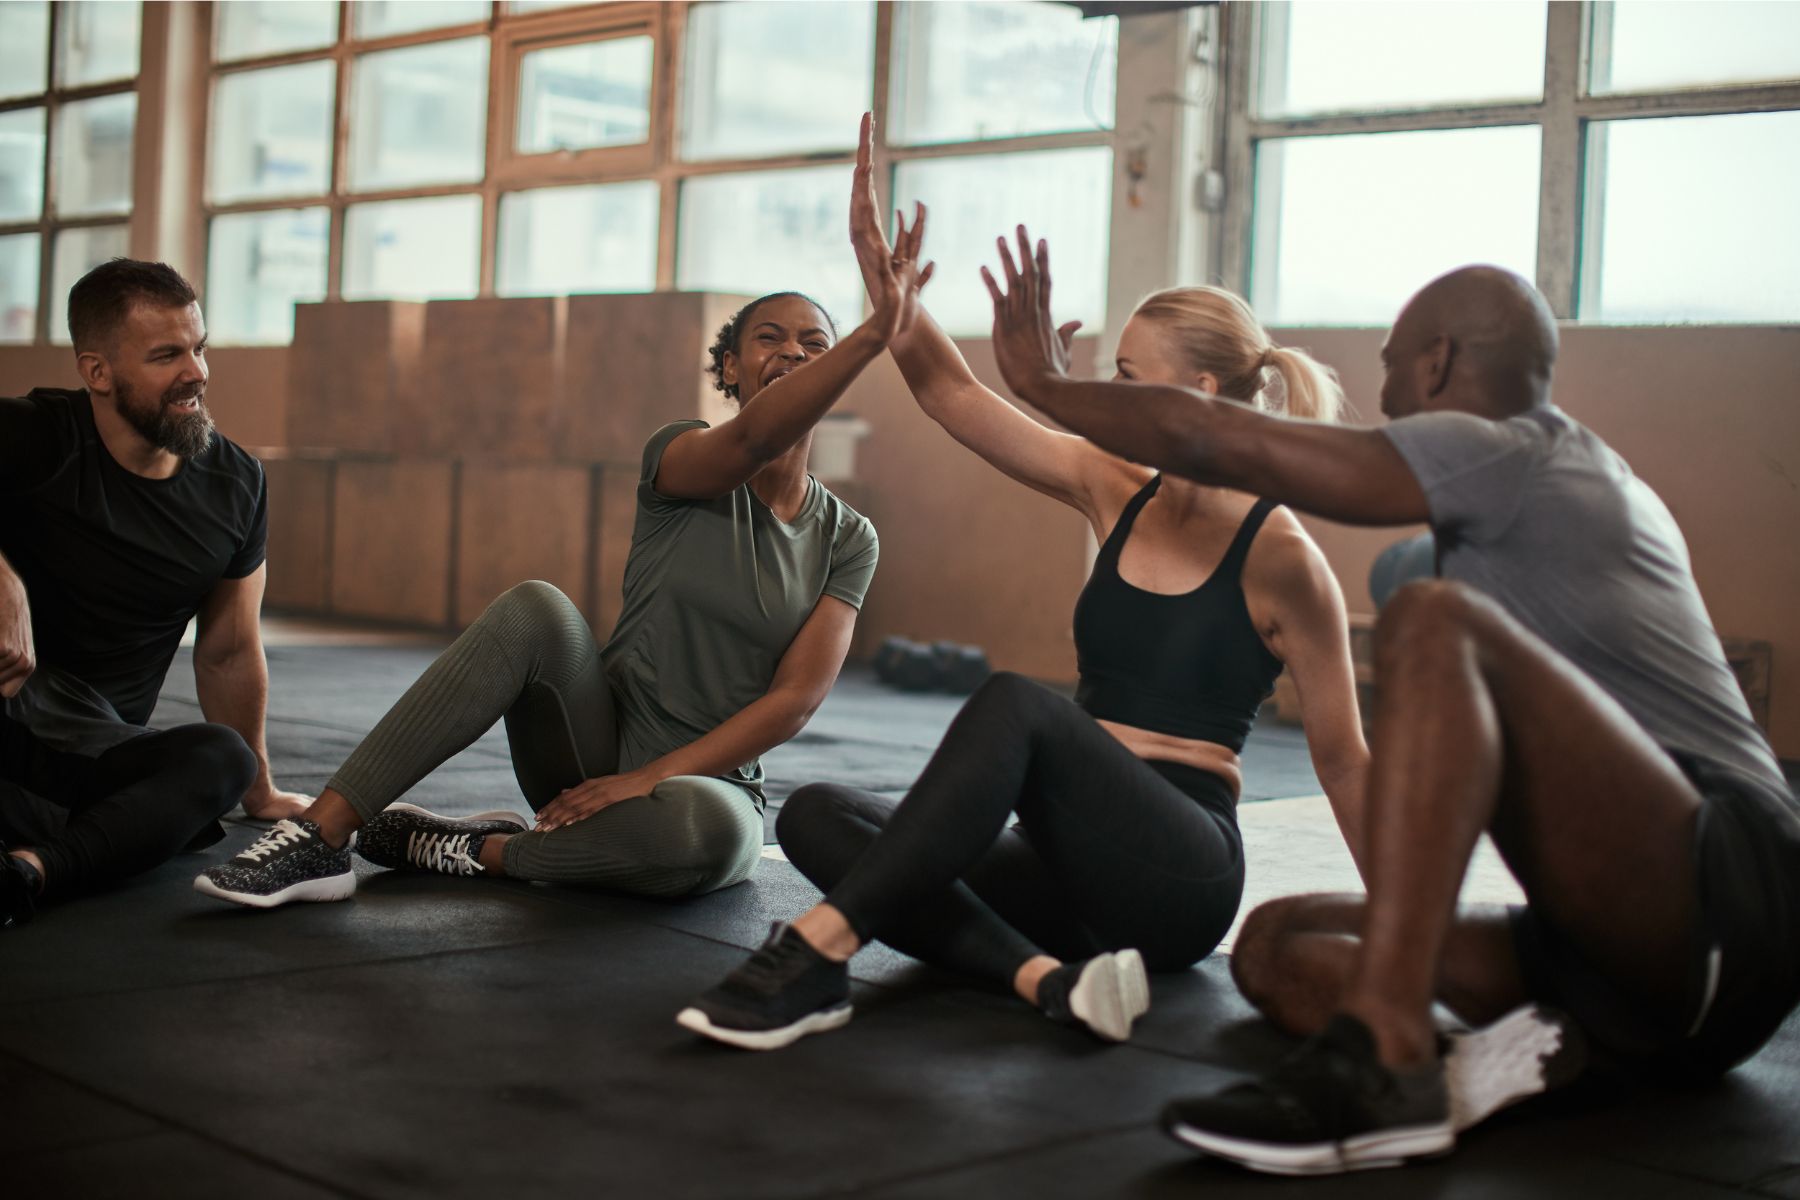 The Benefits of Group Exercise Classes